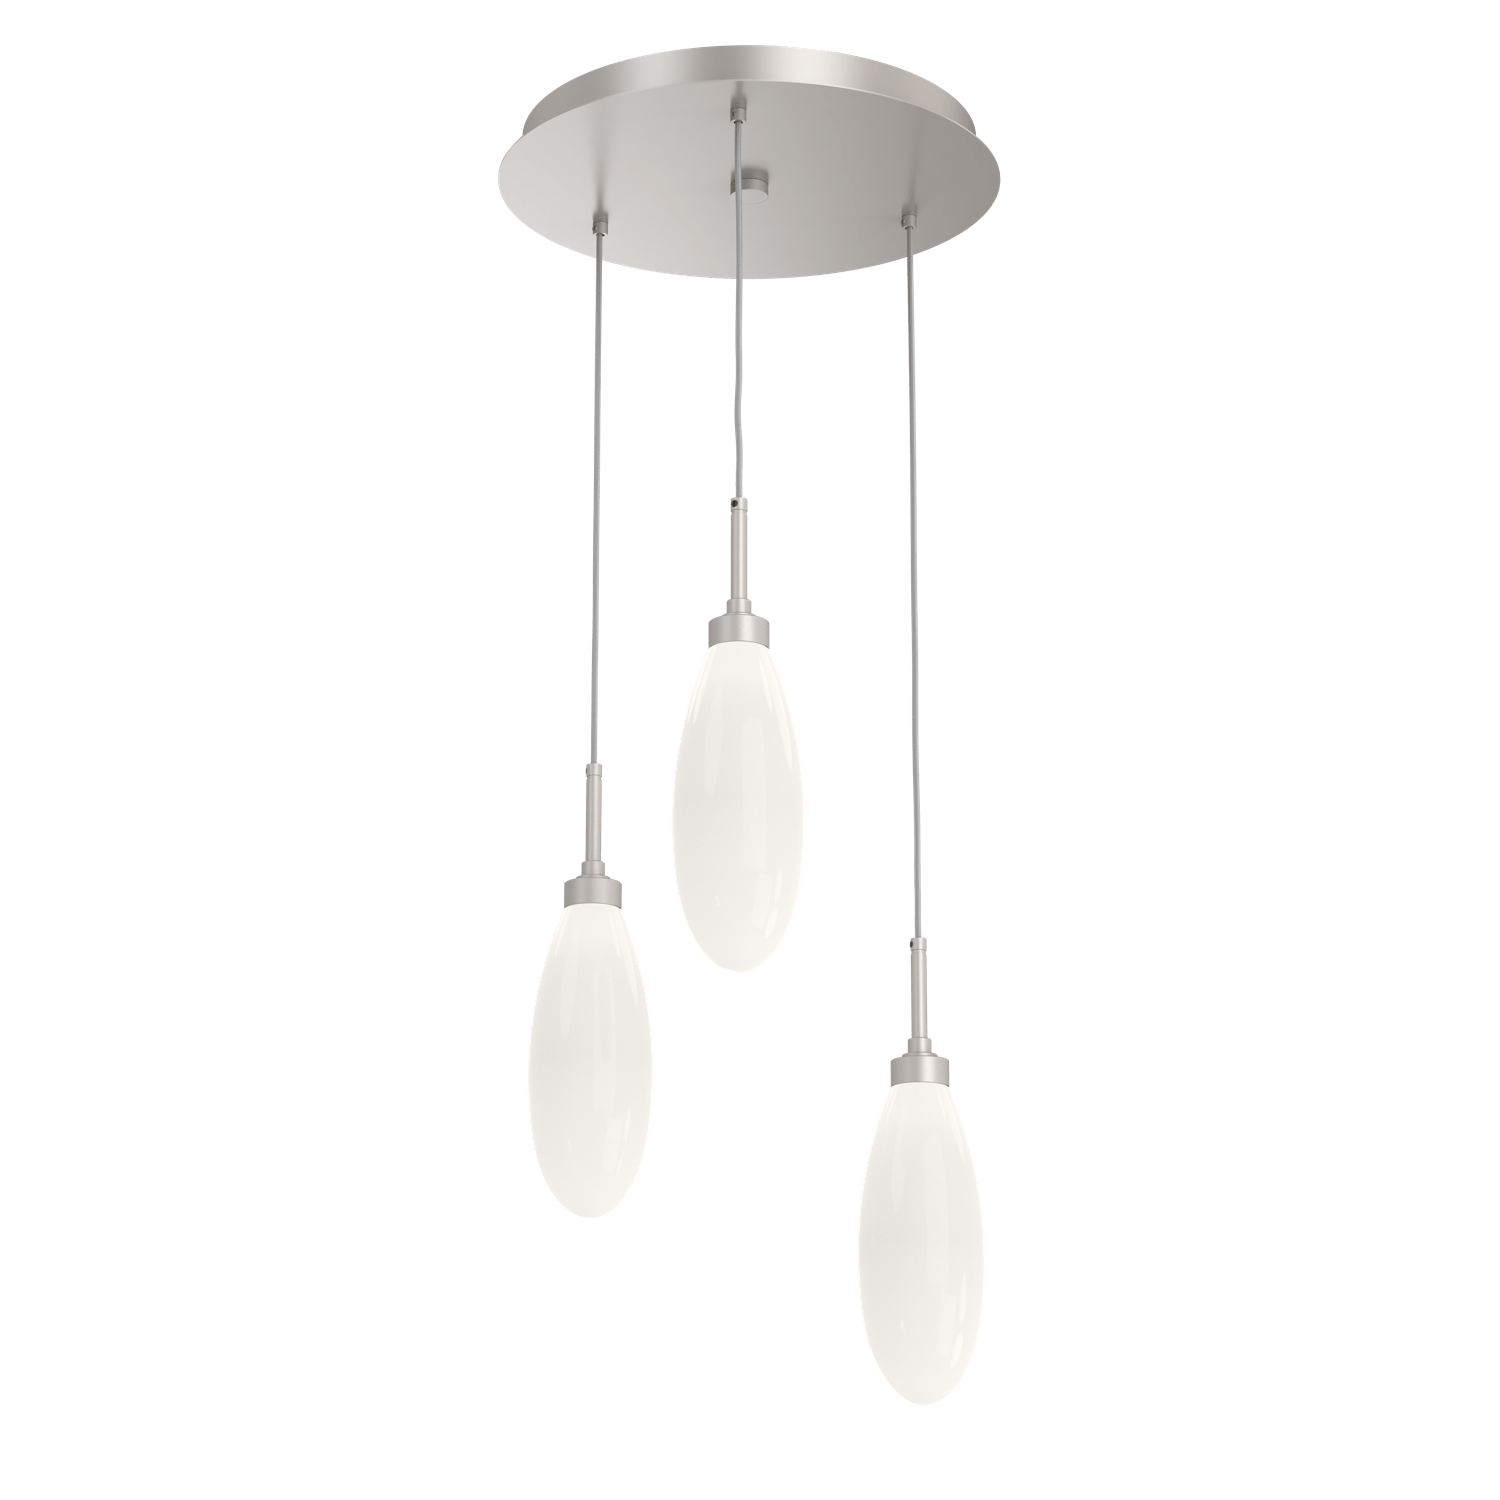 CHB0071-03-BS-WL-LL-Hammerton-Studio-Fiori-3-light-round-pendant-chandelier-with-metallic-beige-silver-finish-and-opal-white-glass-shades-and-LED-lamping